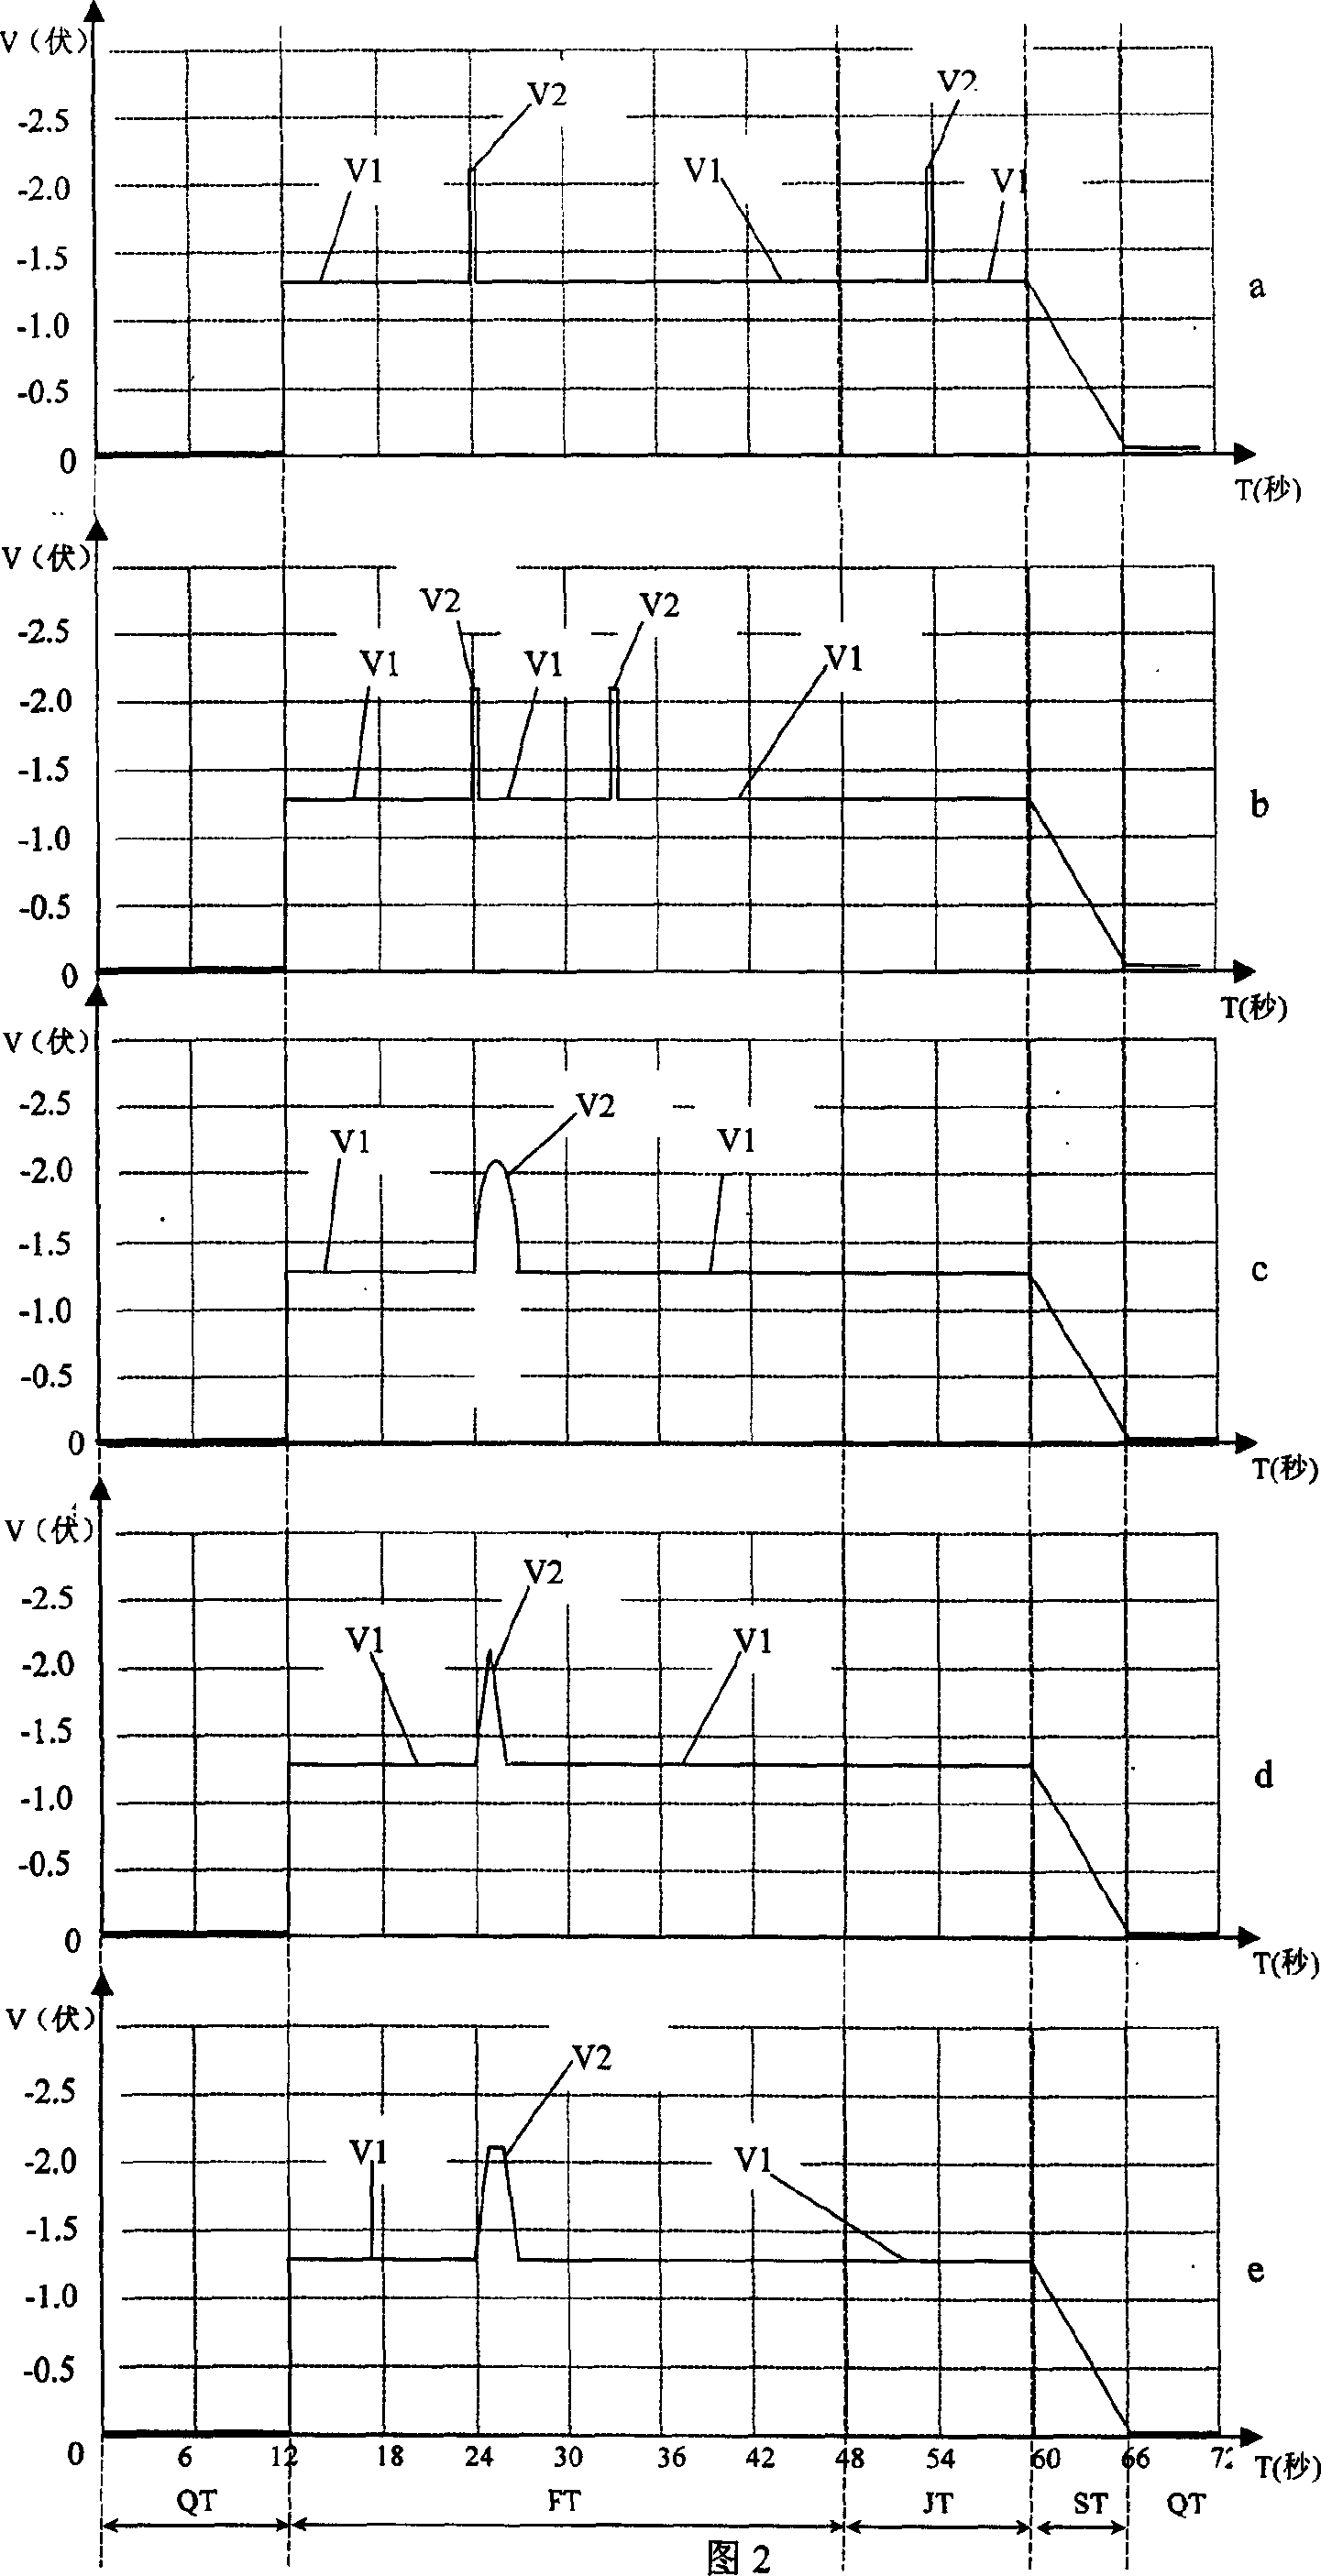 Anode digestion votammetry